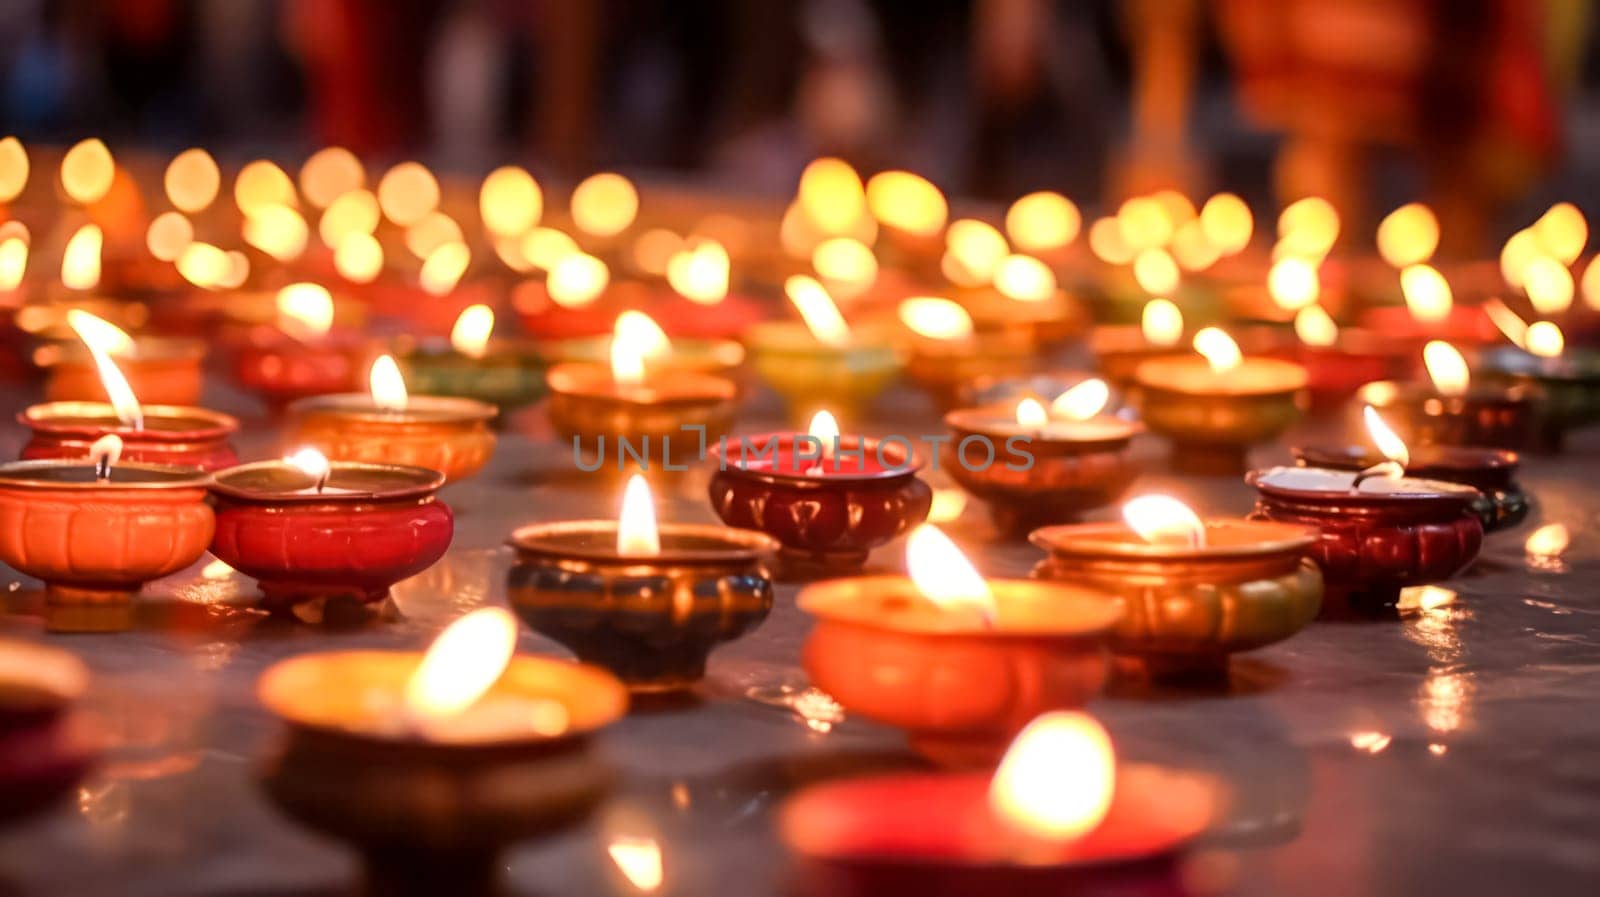 In the midst of colorful festivities, people joyfully celebrate Diwali, lighting candles on the streets, enhancing the spirit of the Indian holiday.